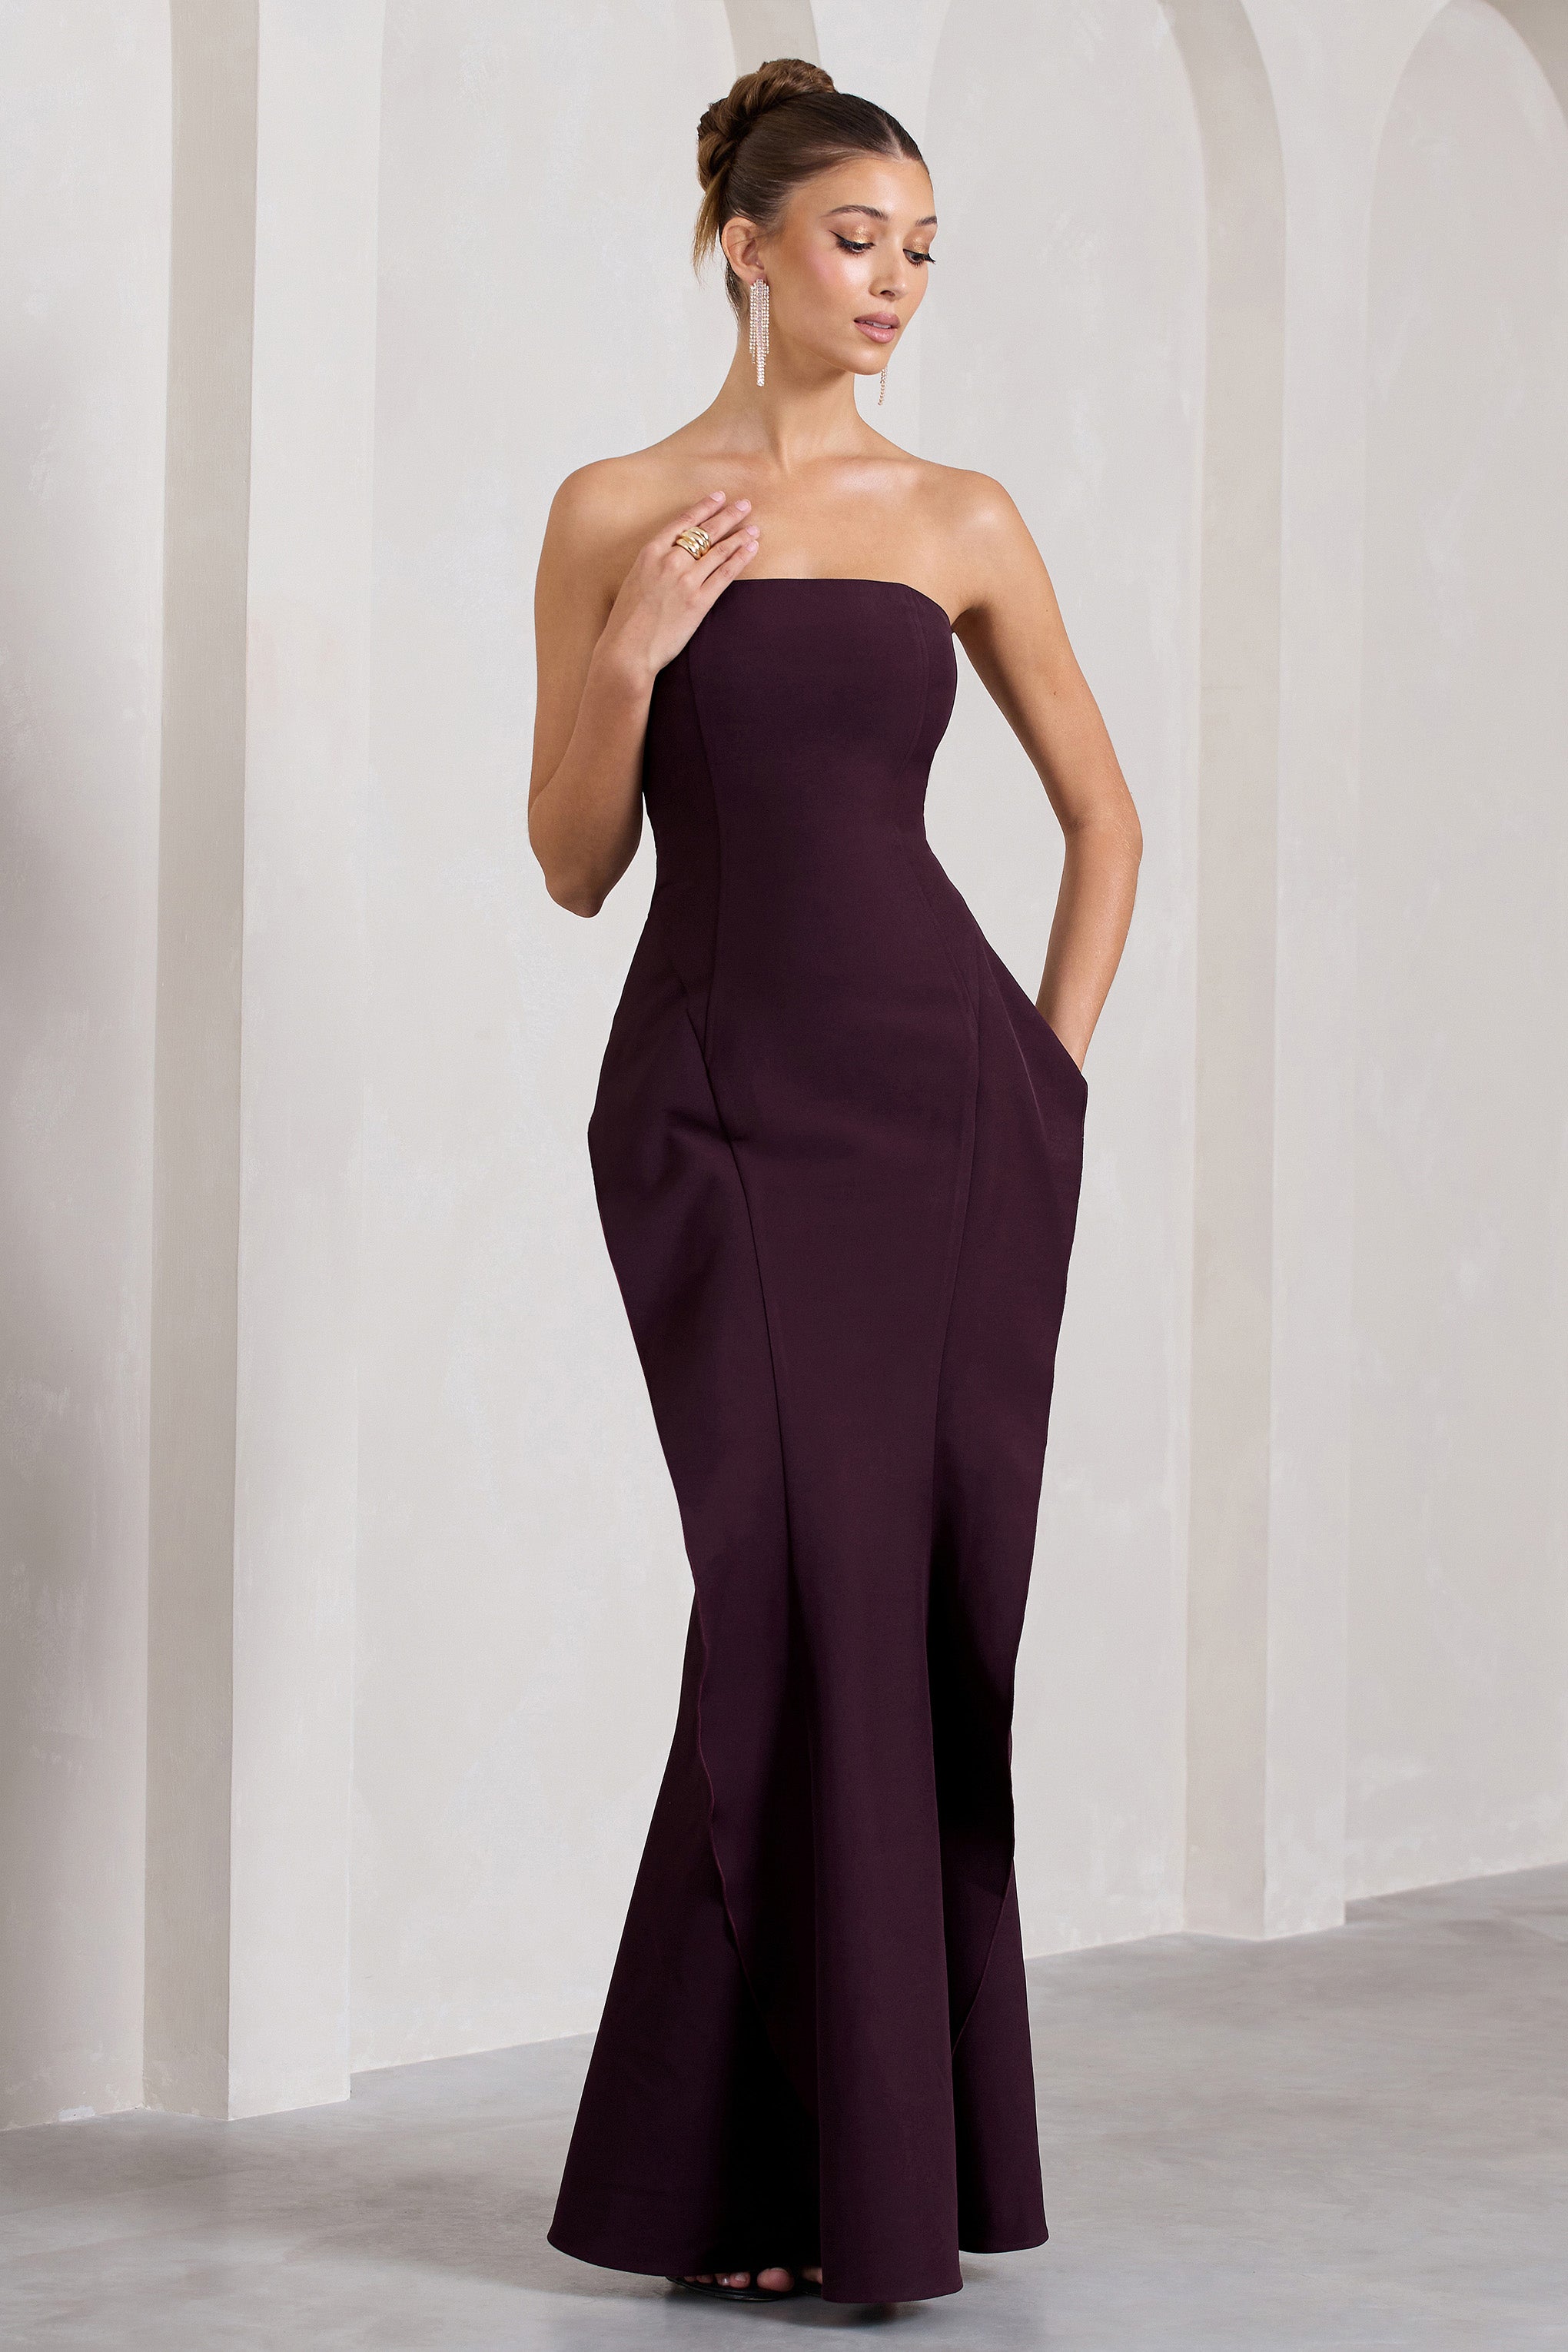 The Real Thing | Plum Strapless Draped Fishtail Maxi Dress product